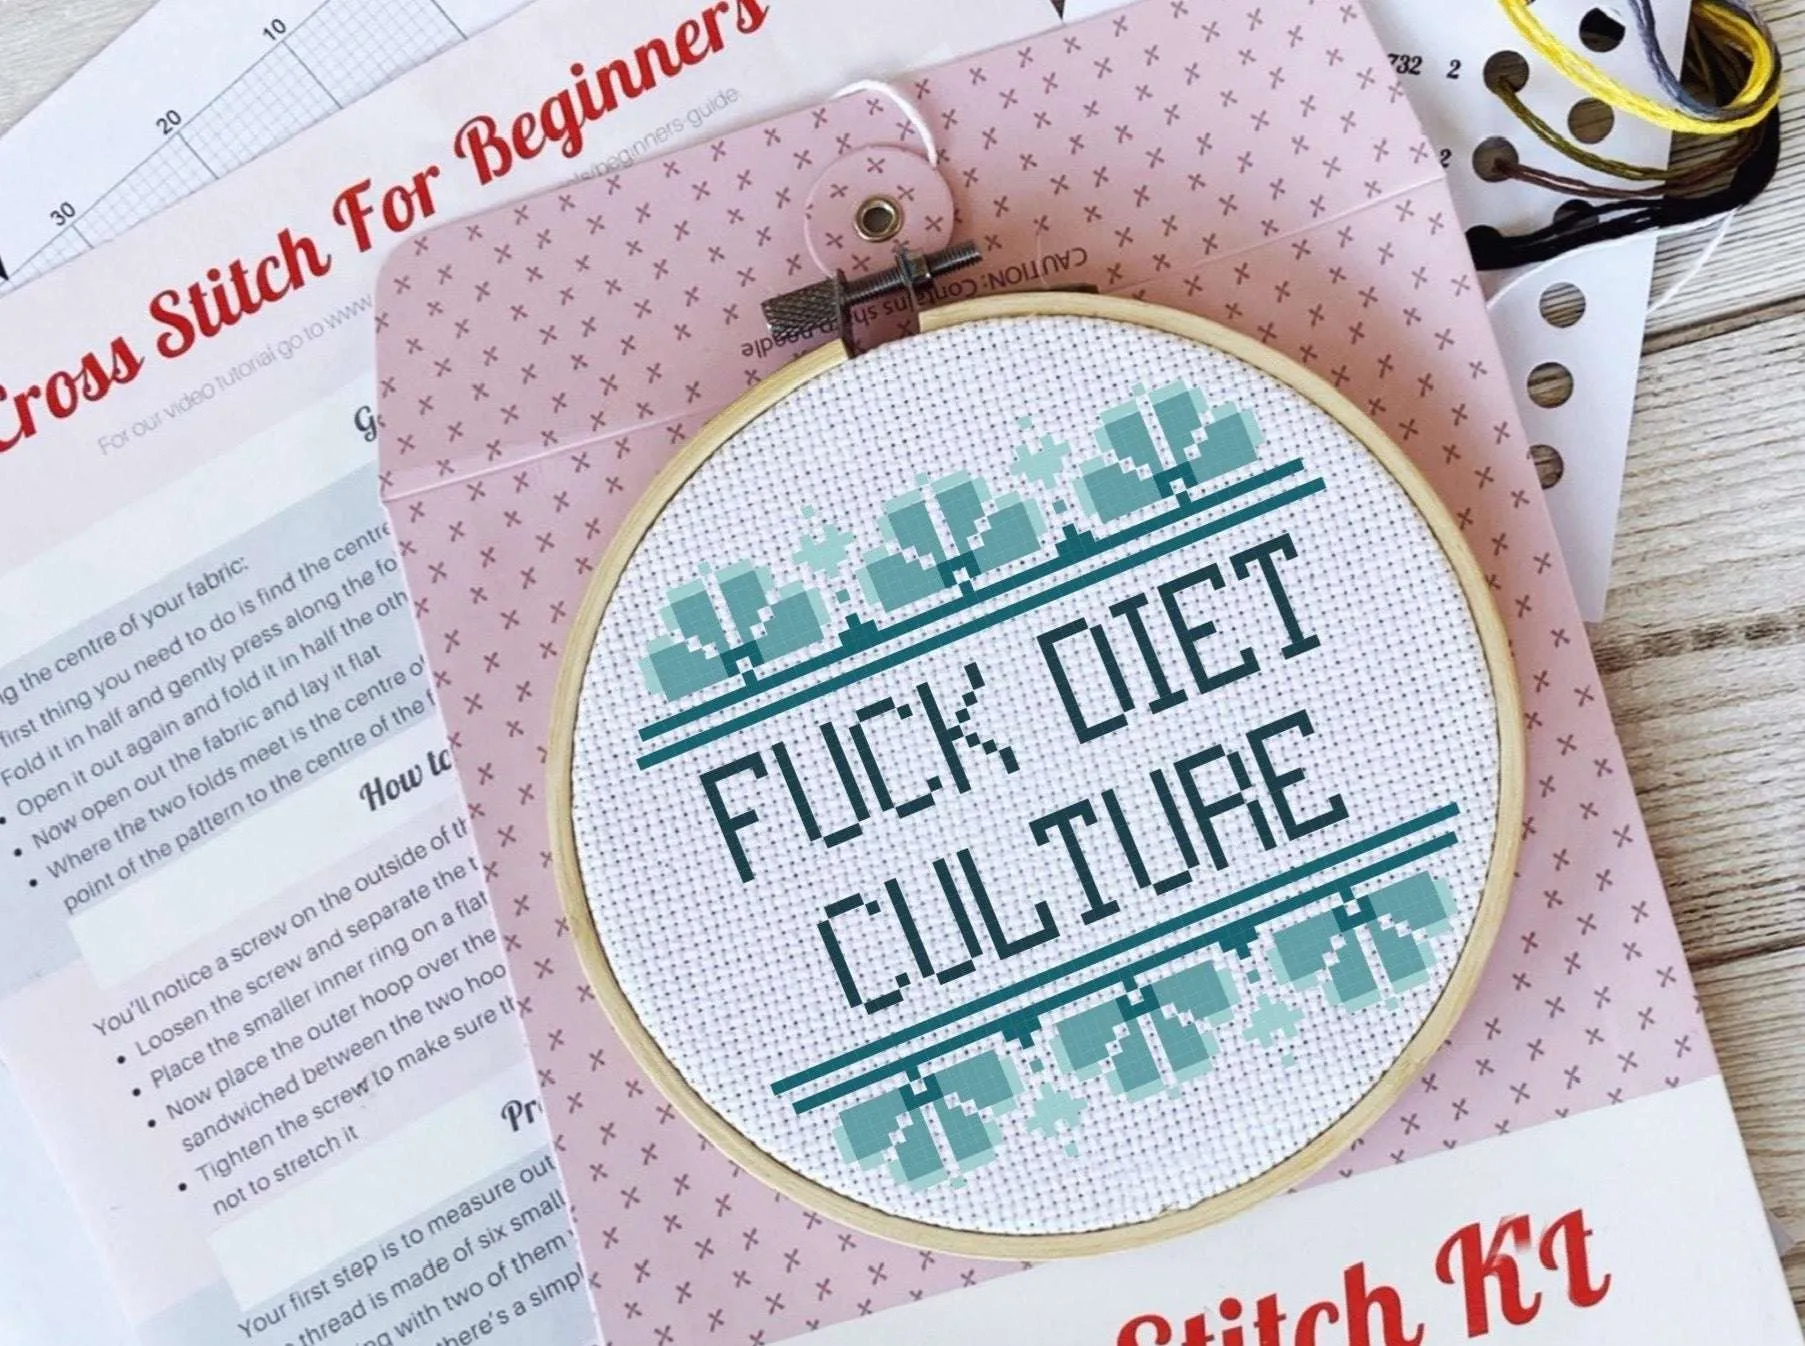 A framed cross stitch reads 'FUCK DIET CULTURE' surrounded by blue art deco patterns.